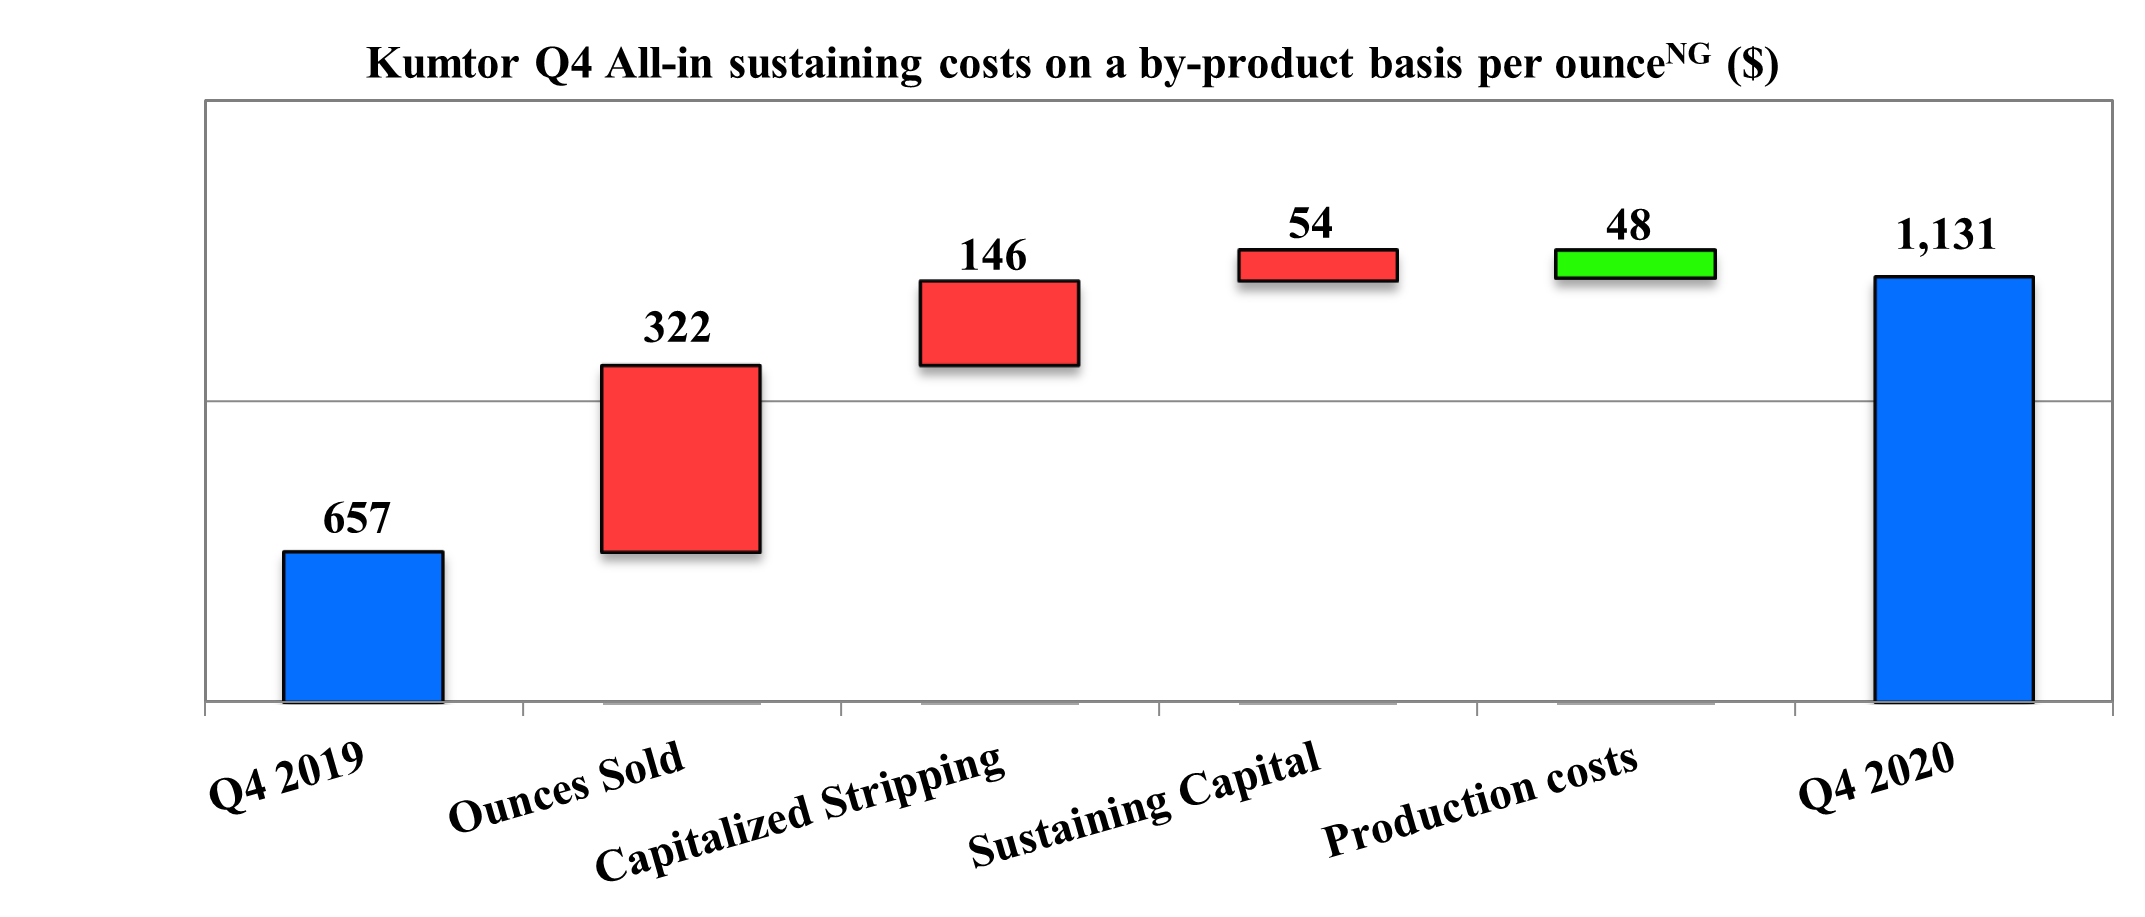 Kumtor Q4 All-in sustaining costs on a by-product basis per ounce (Non-GAAP) ($)